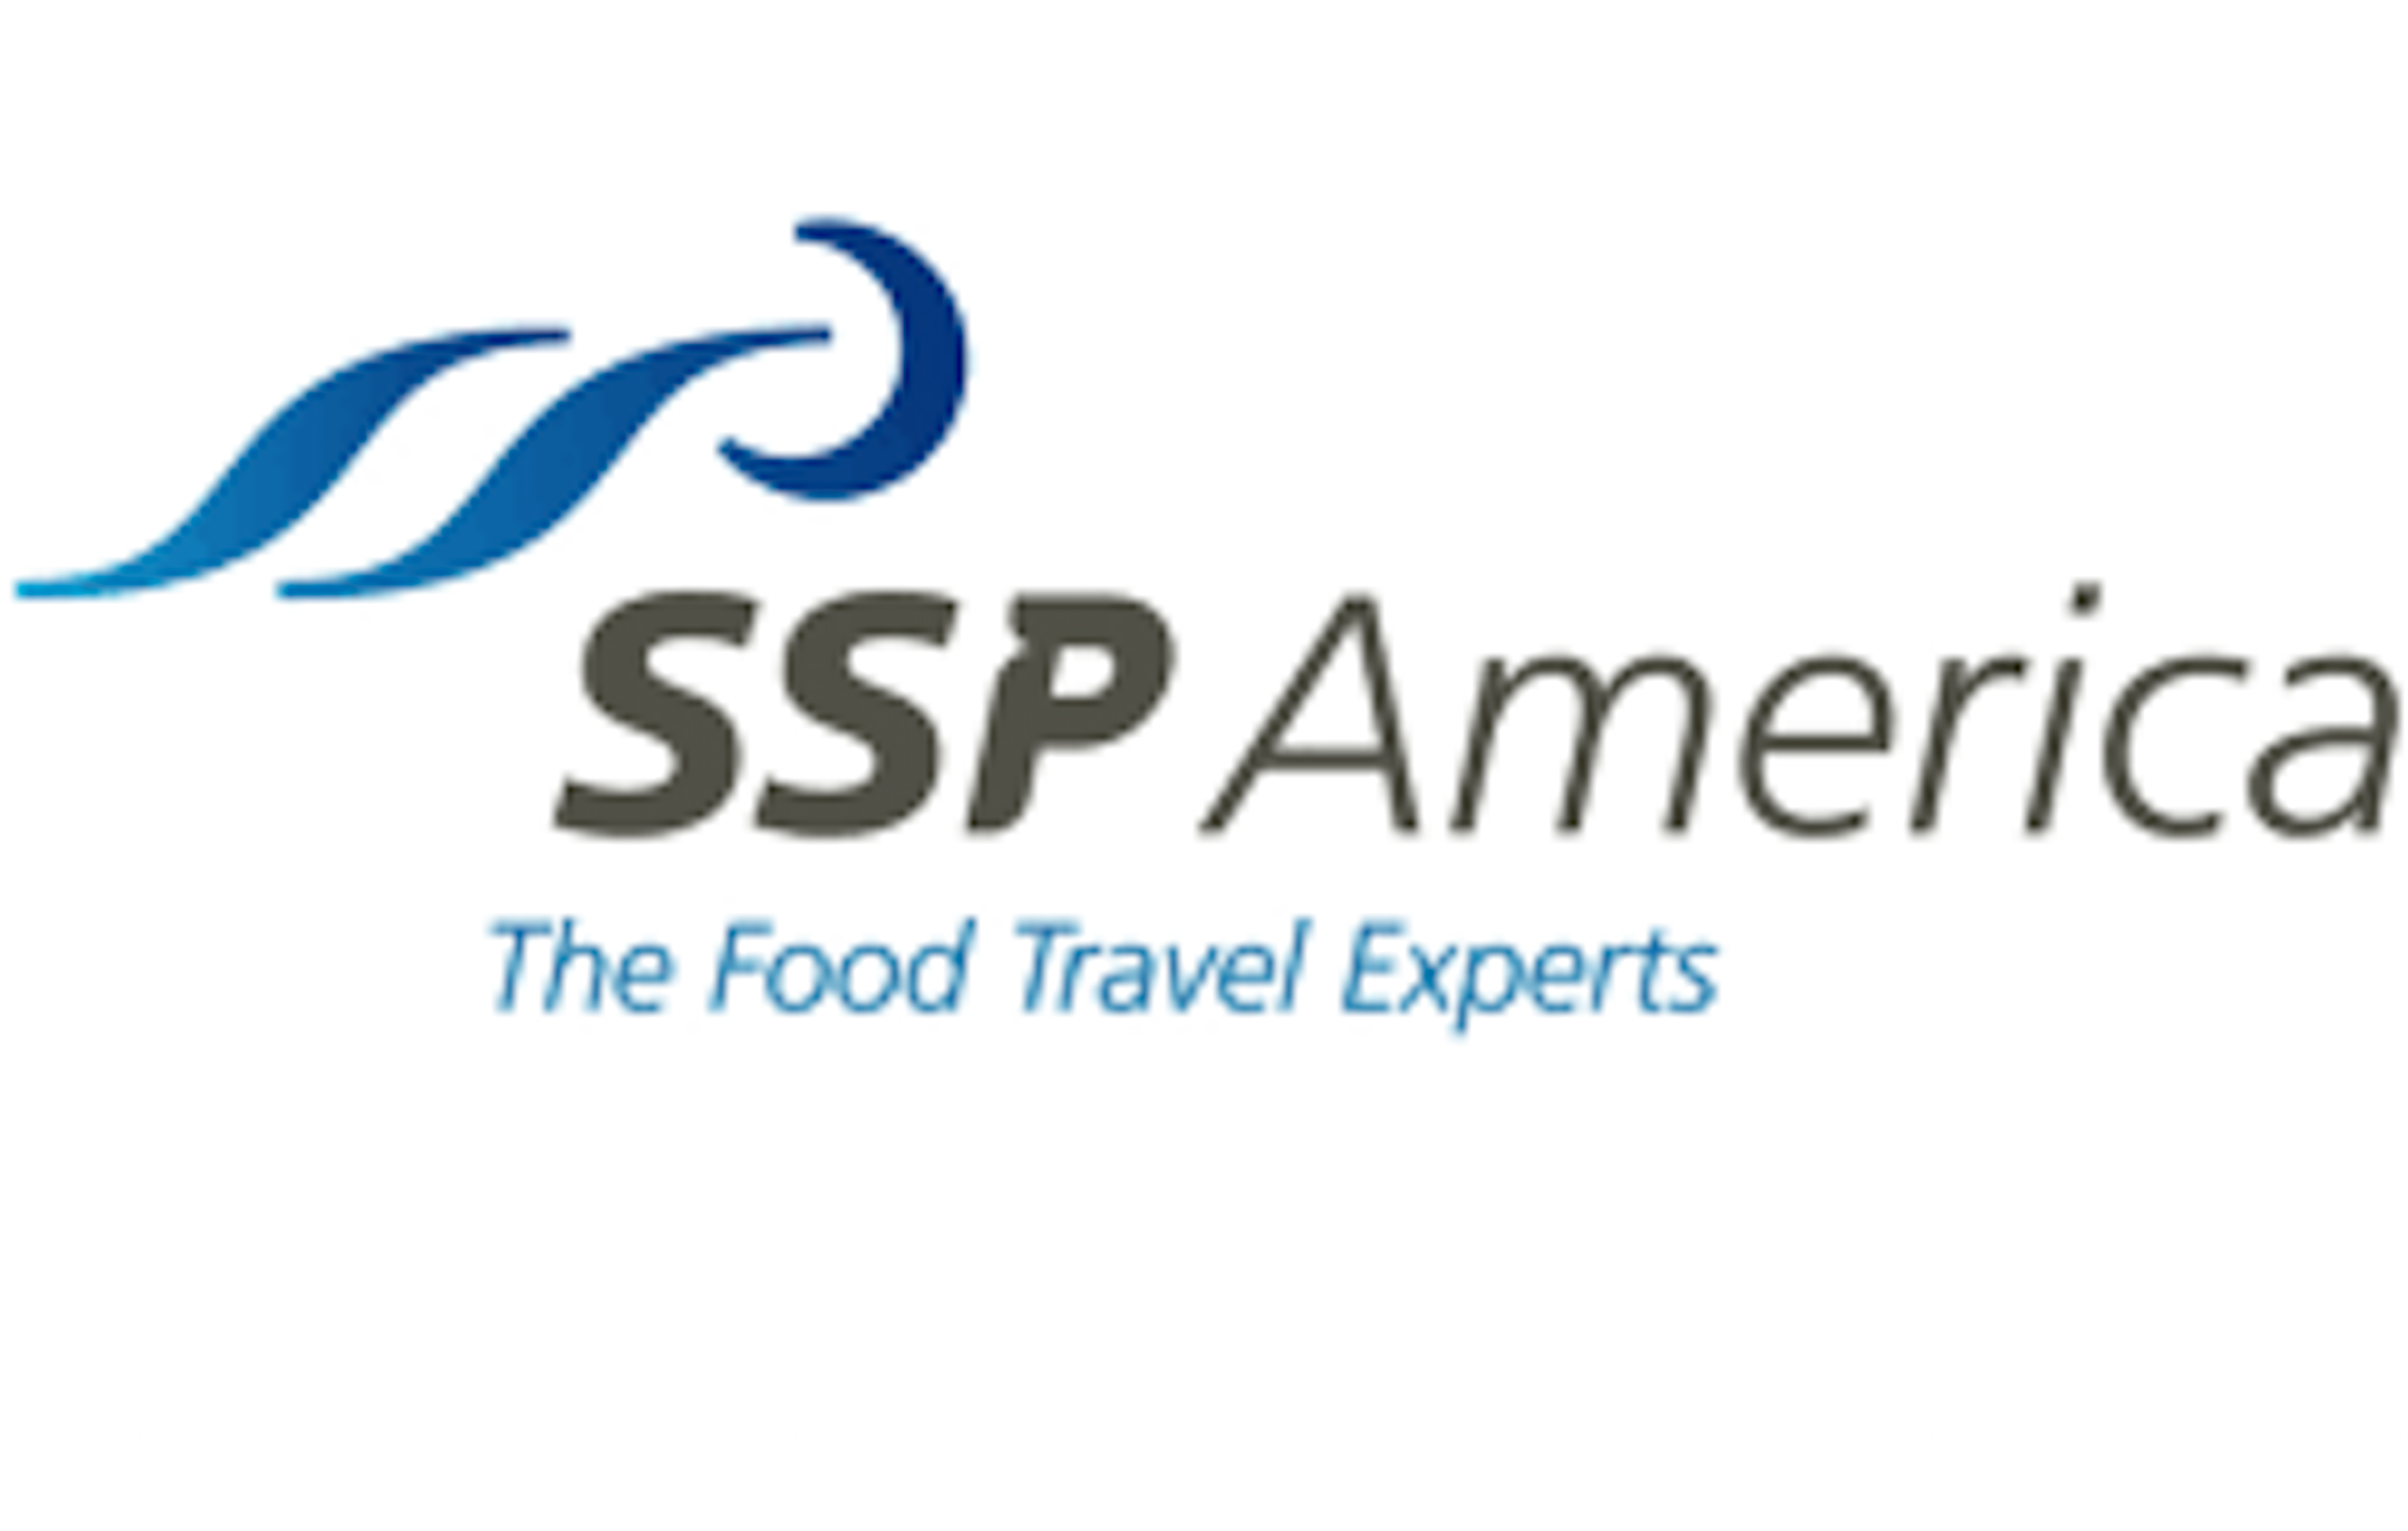 SSP America Partners with Meals on Wheels America to Support Homebound Older Adults